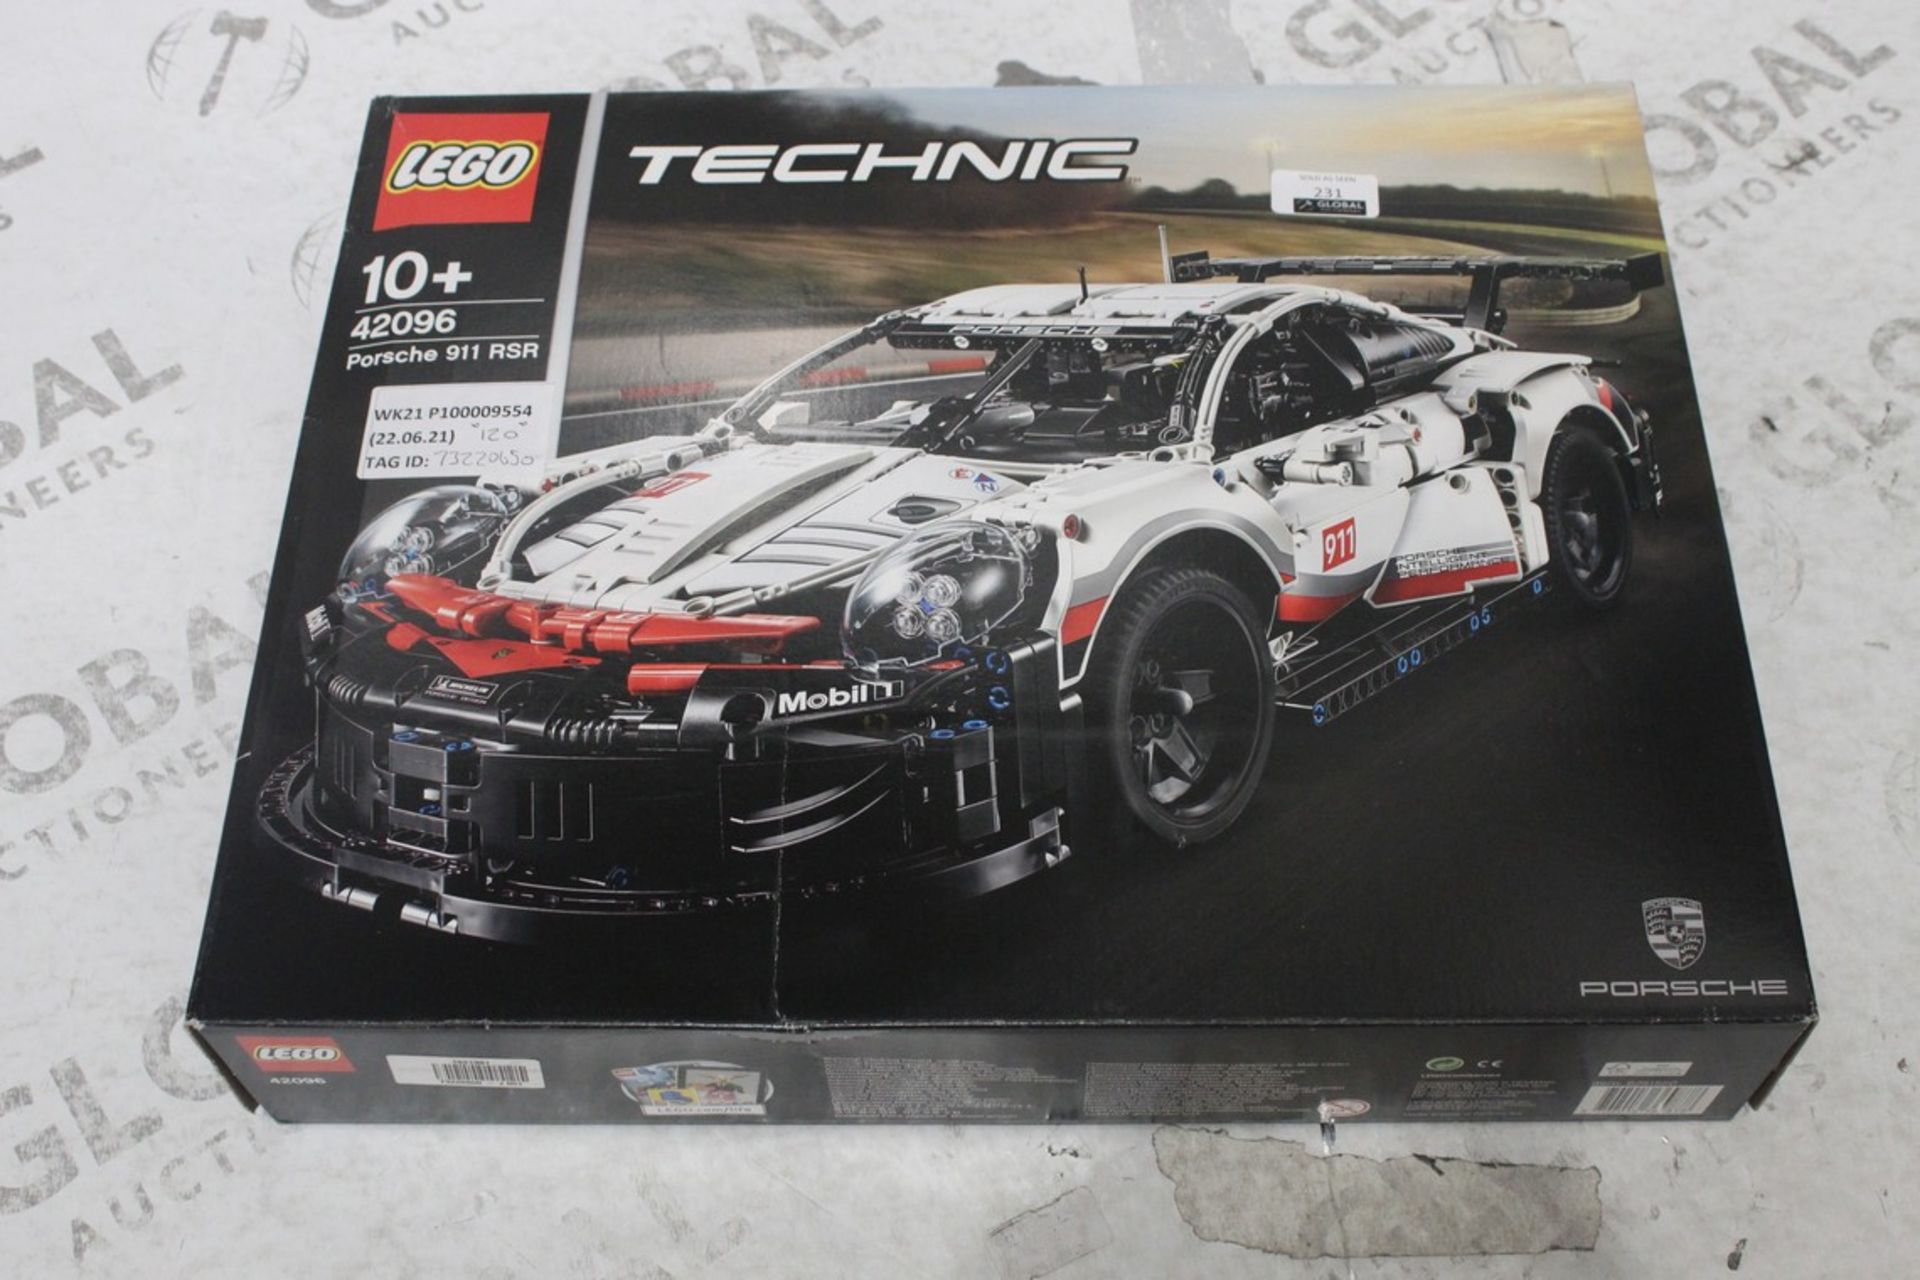 Boxed Lego Technic Porsche 911 RSR Car RRP £120 (73220650) (Pictures Are For Illustration Purposes